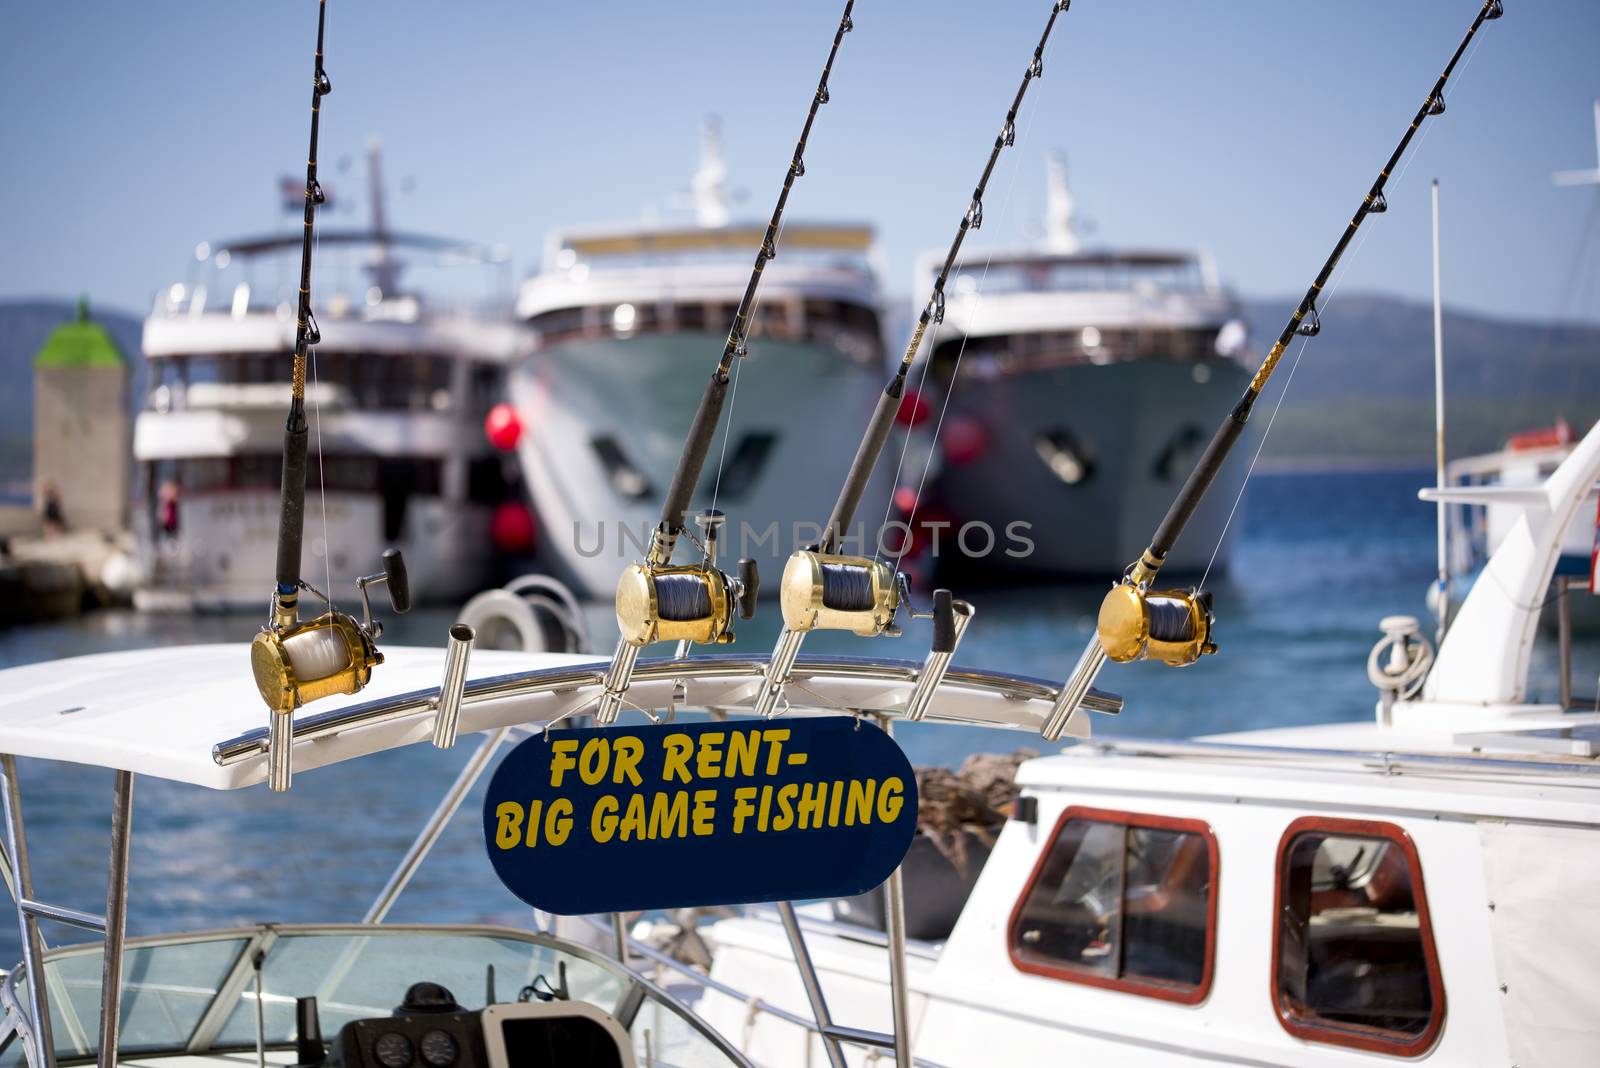 Big game fishing and equipment for rental with sign and equipment displayed